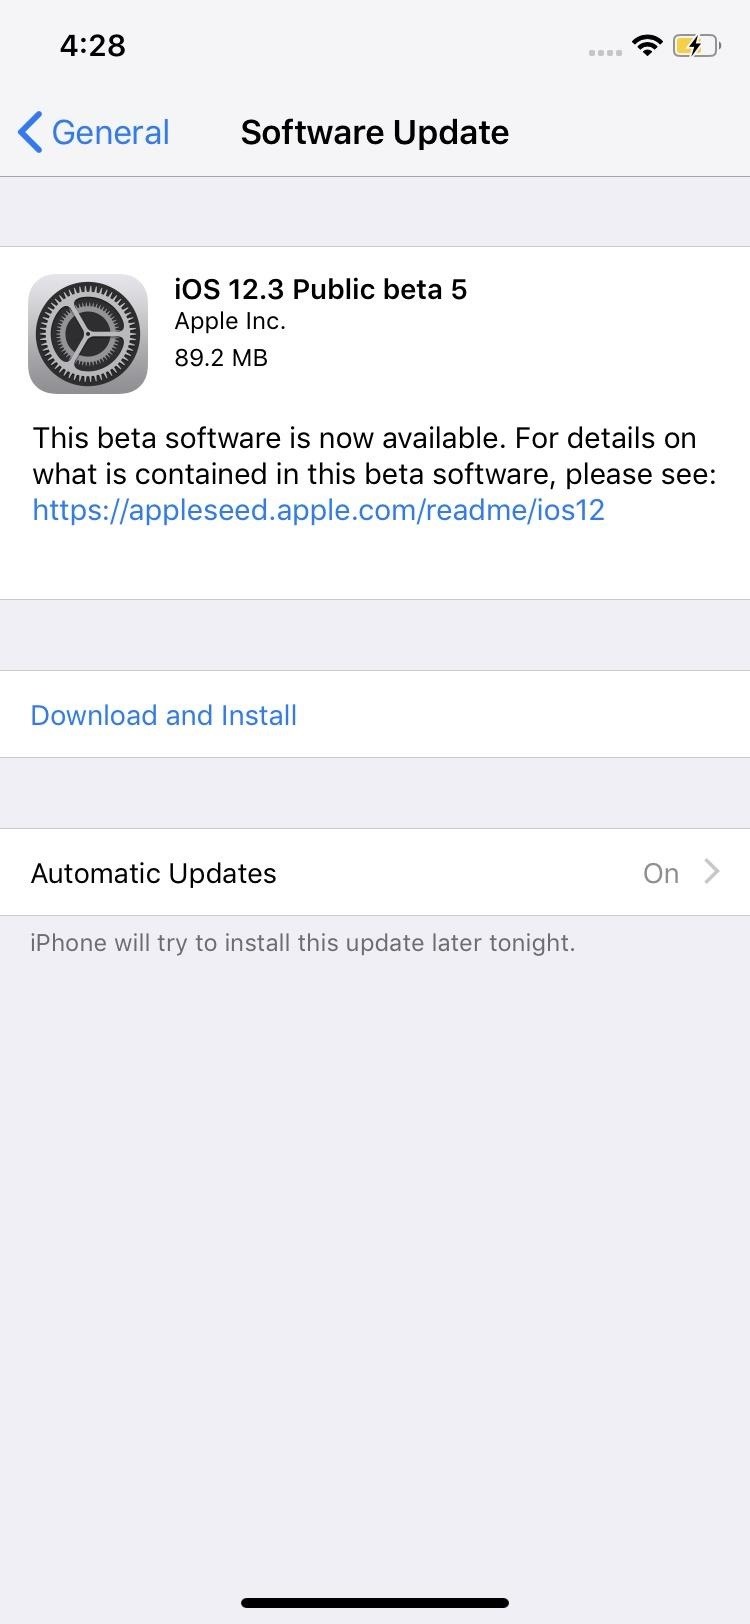 Apple's iOS 12.3 Public Beta 5 for iPhone Now Available